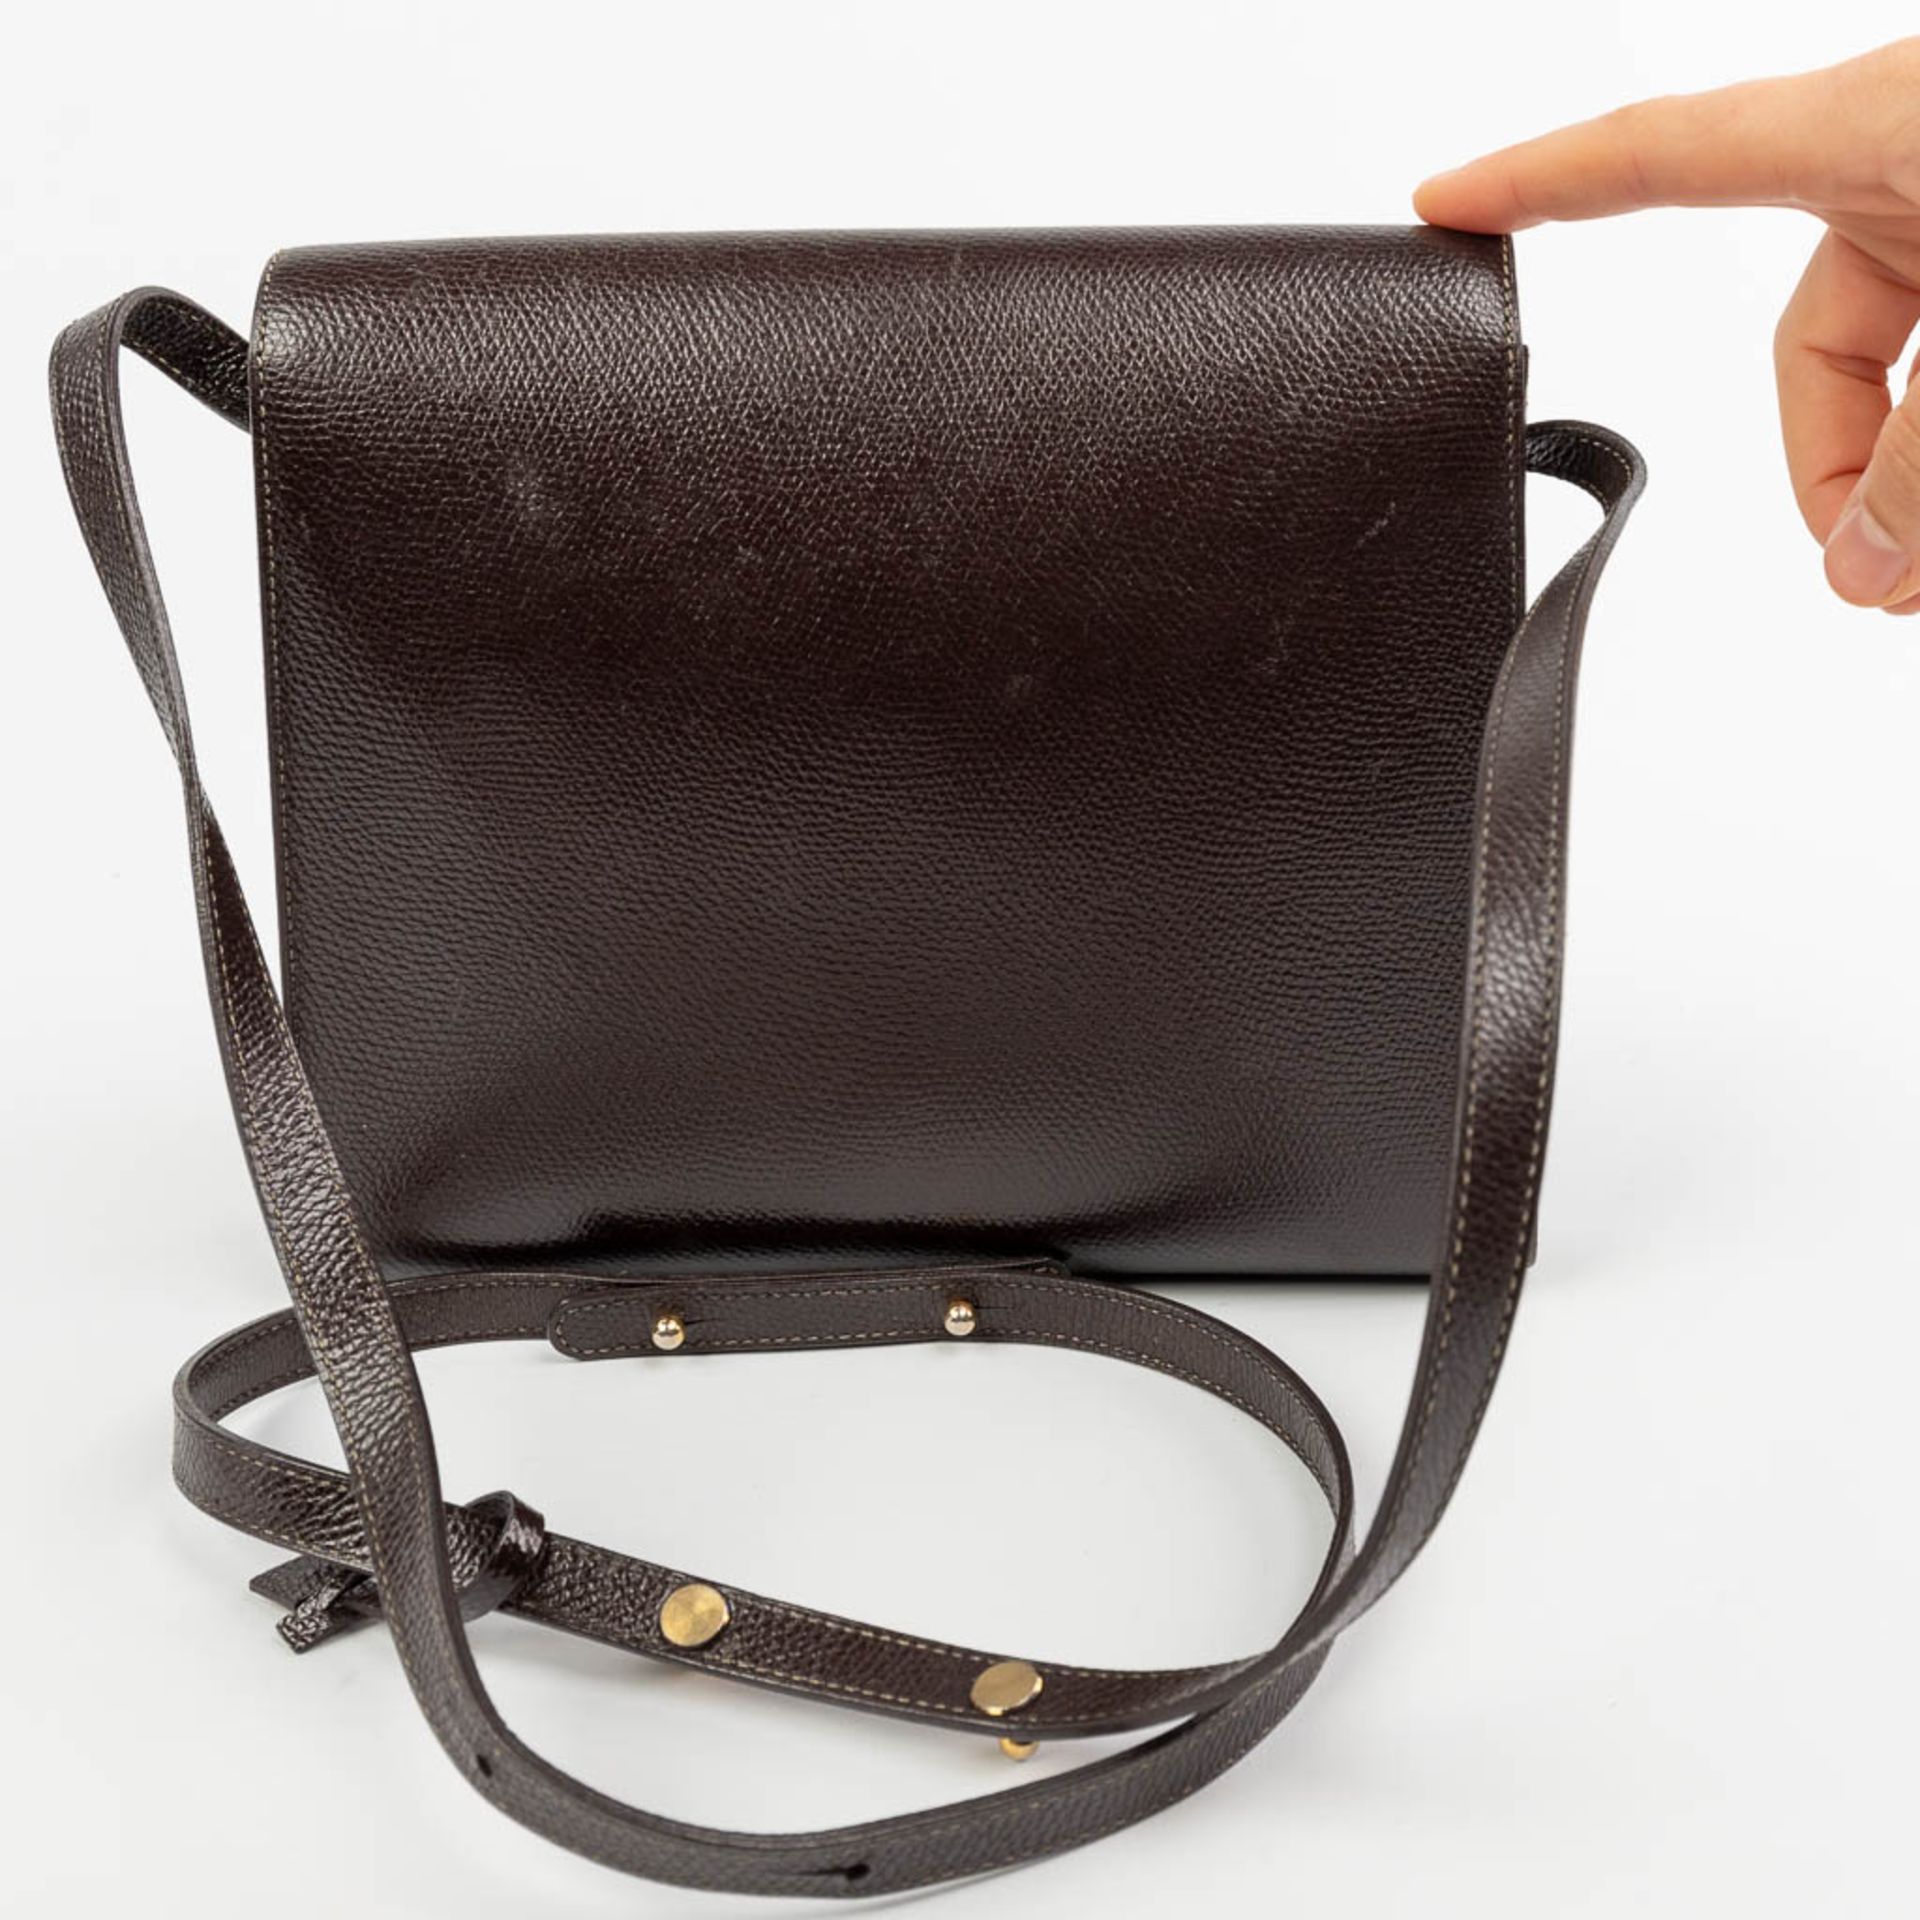 A purse made of brown leather and marked Delvaux. - Image 5 of 12